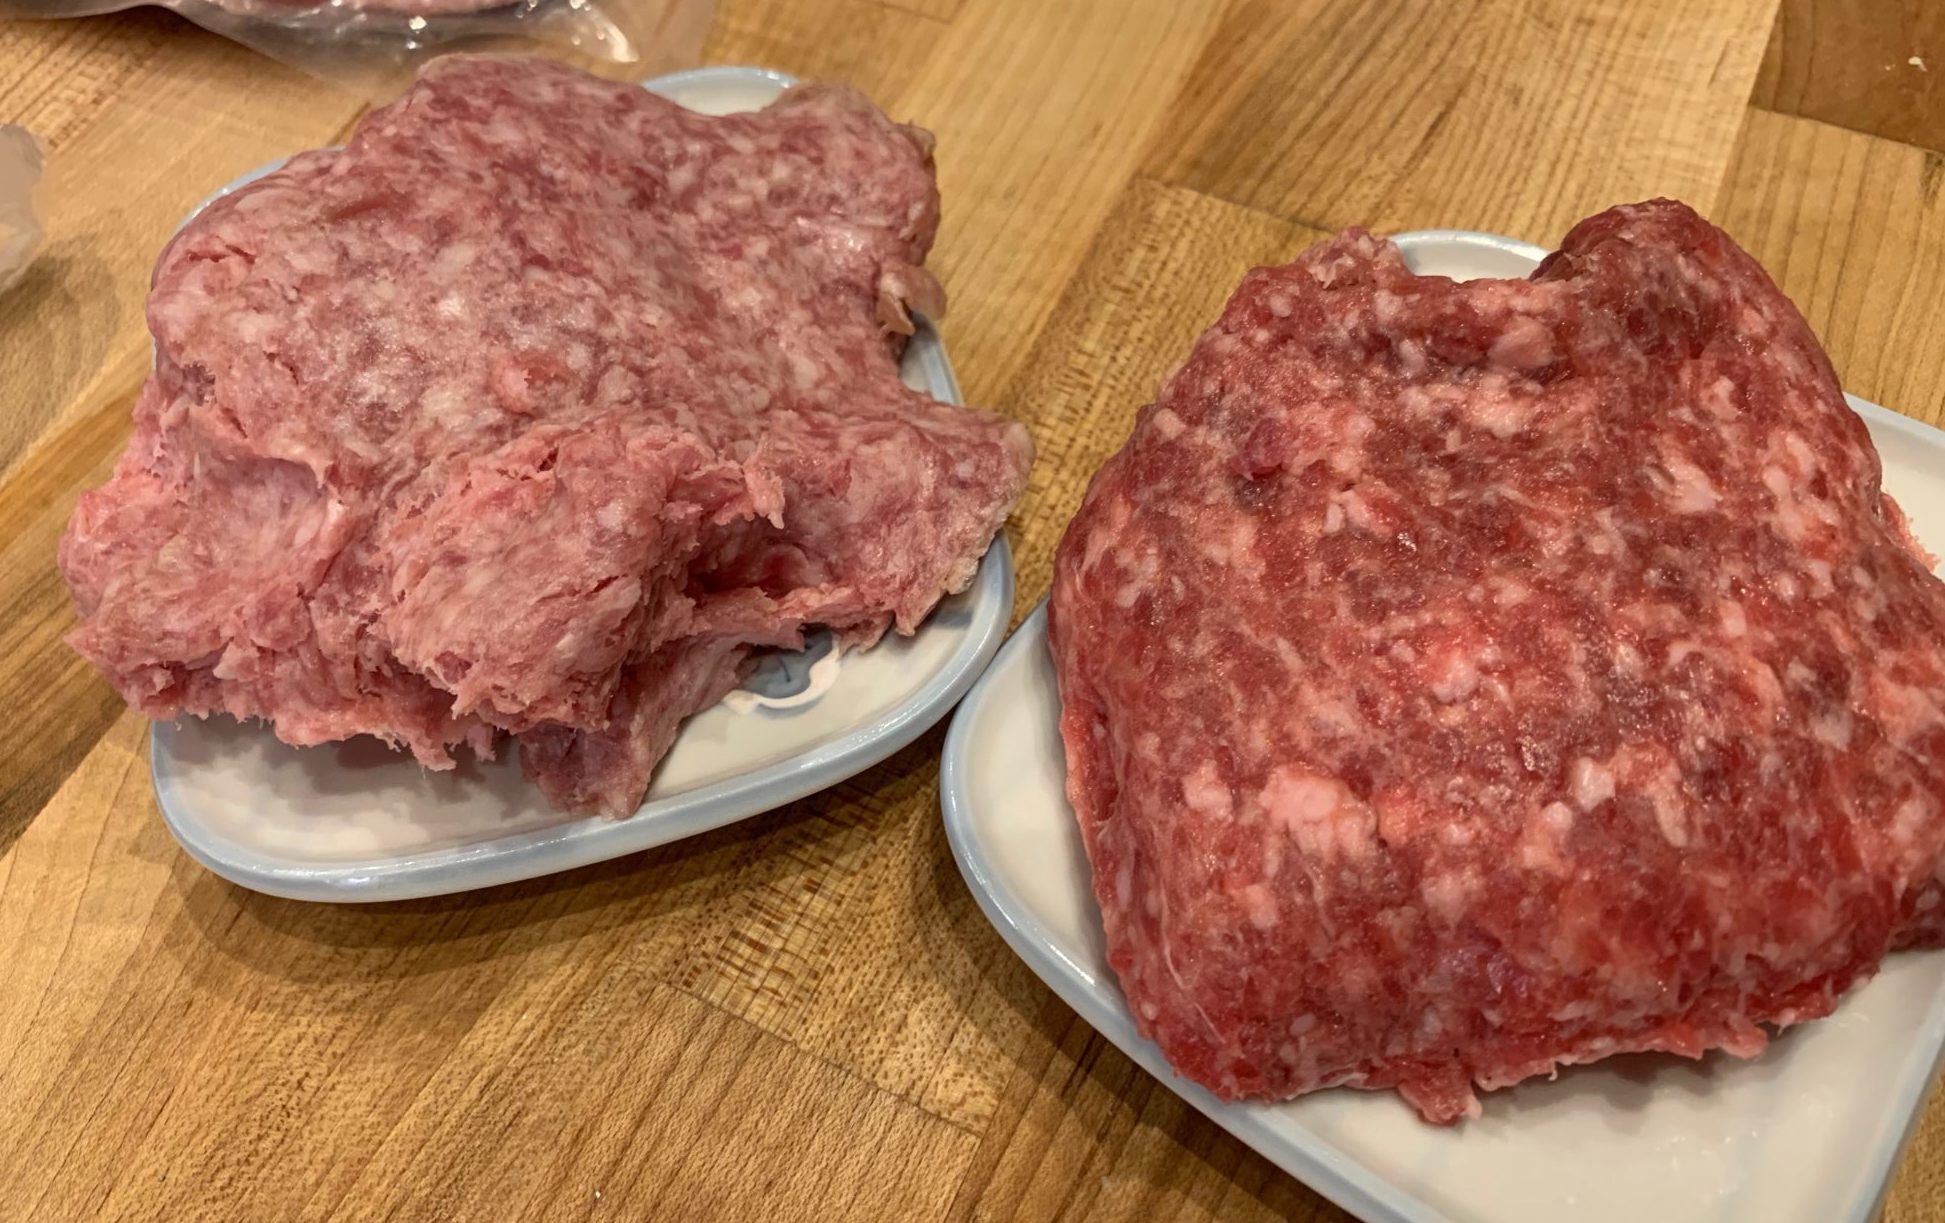 comparison of ground pork and sausage meat